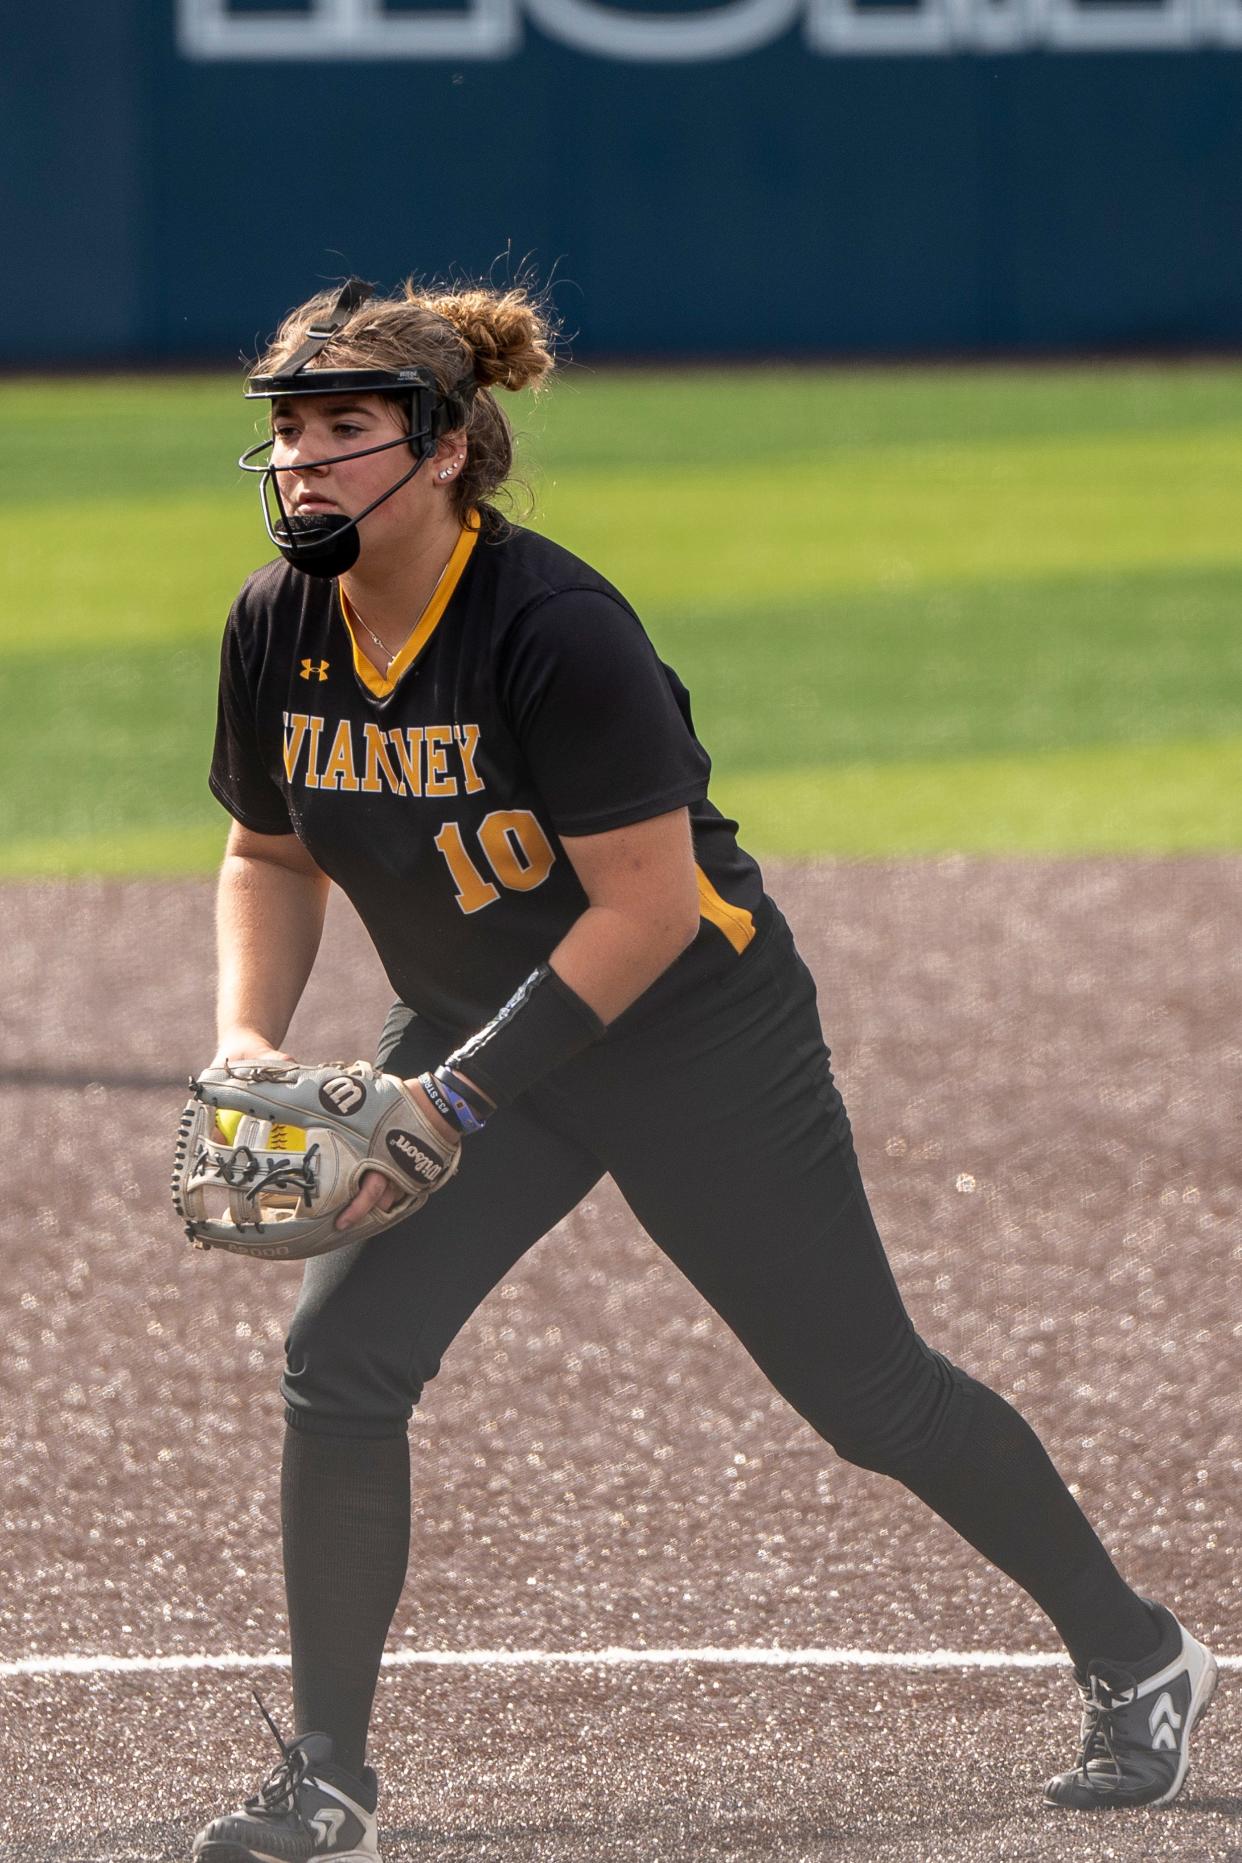 Mount St. Dominic takes on St. John Vianney in the softball state finals at Kean University in Union, NJ on Friday, June 9, 2023. SJV #10 Madison McDougall pitches. 